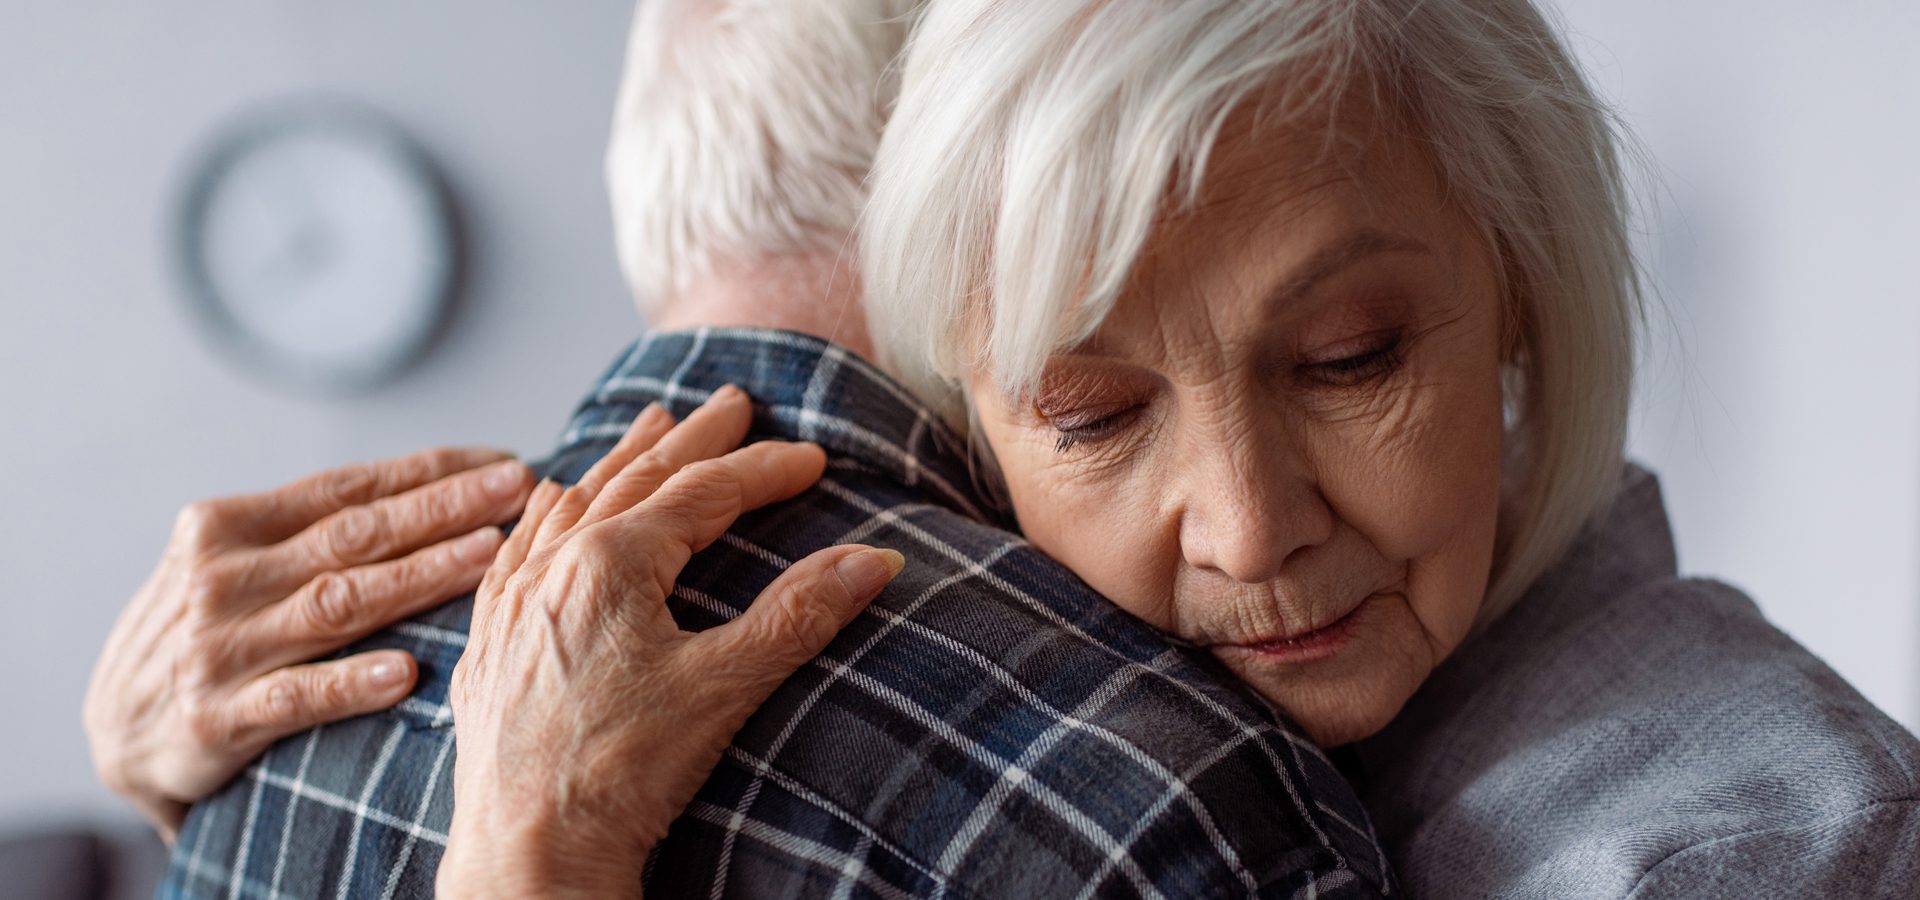 Two older people share an embrace